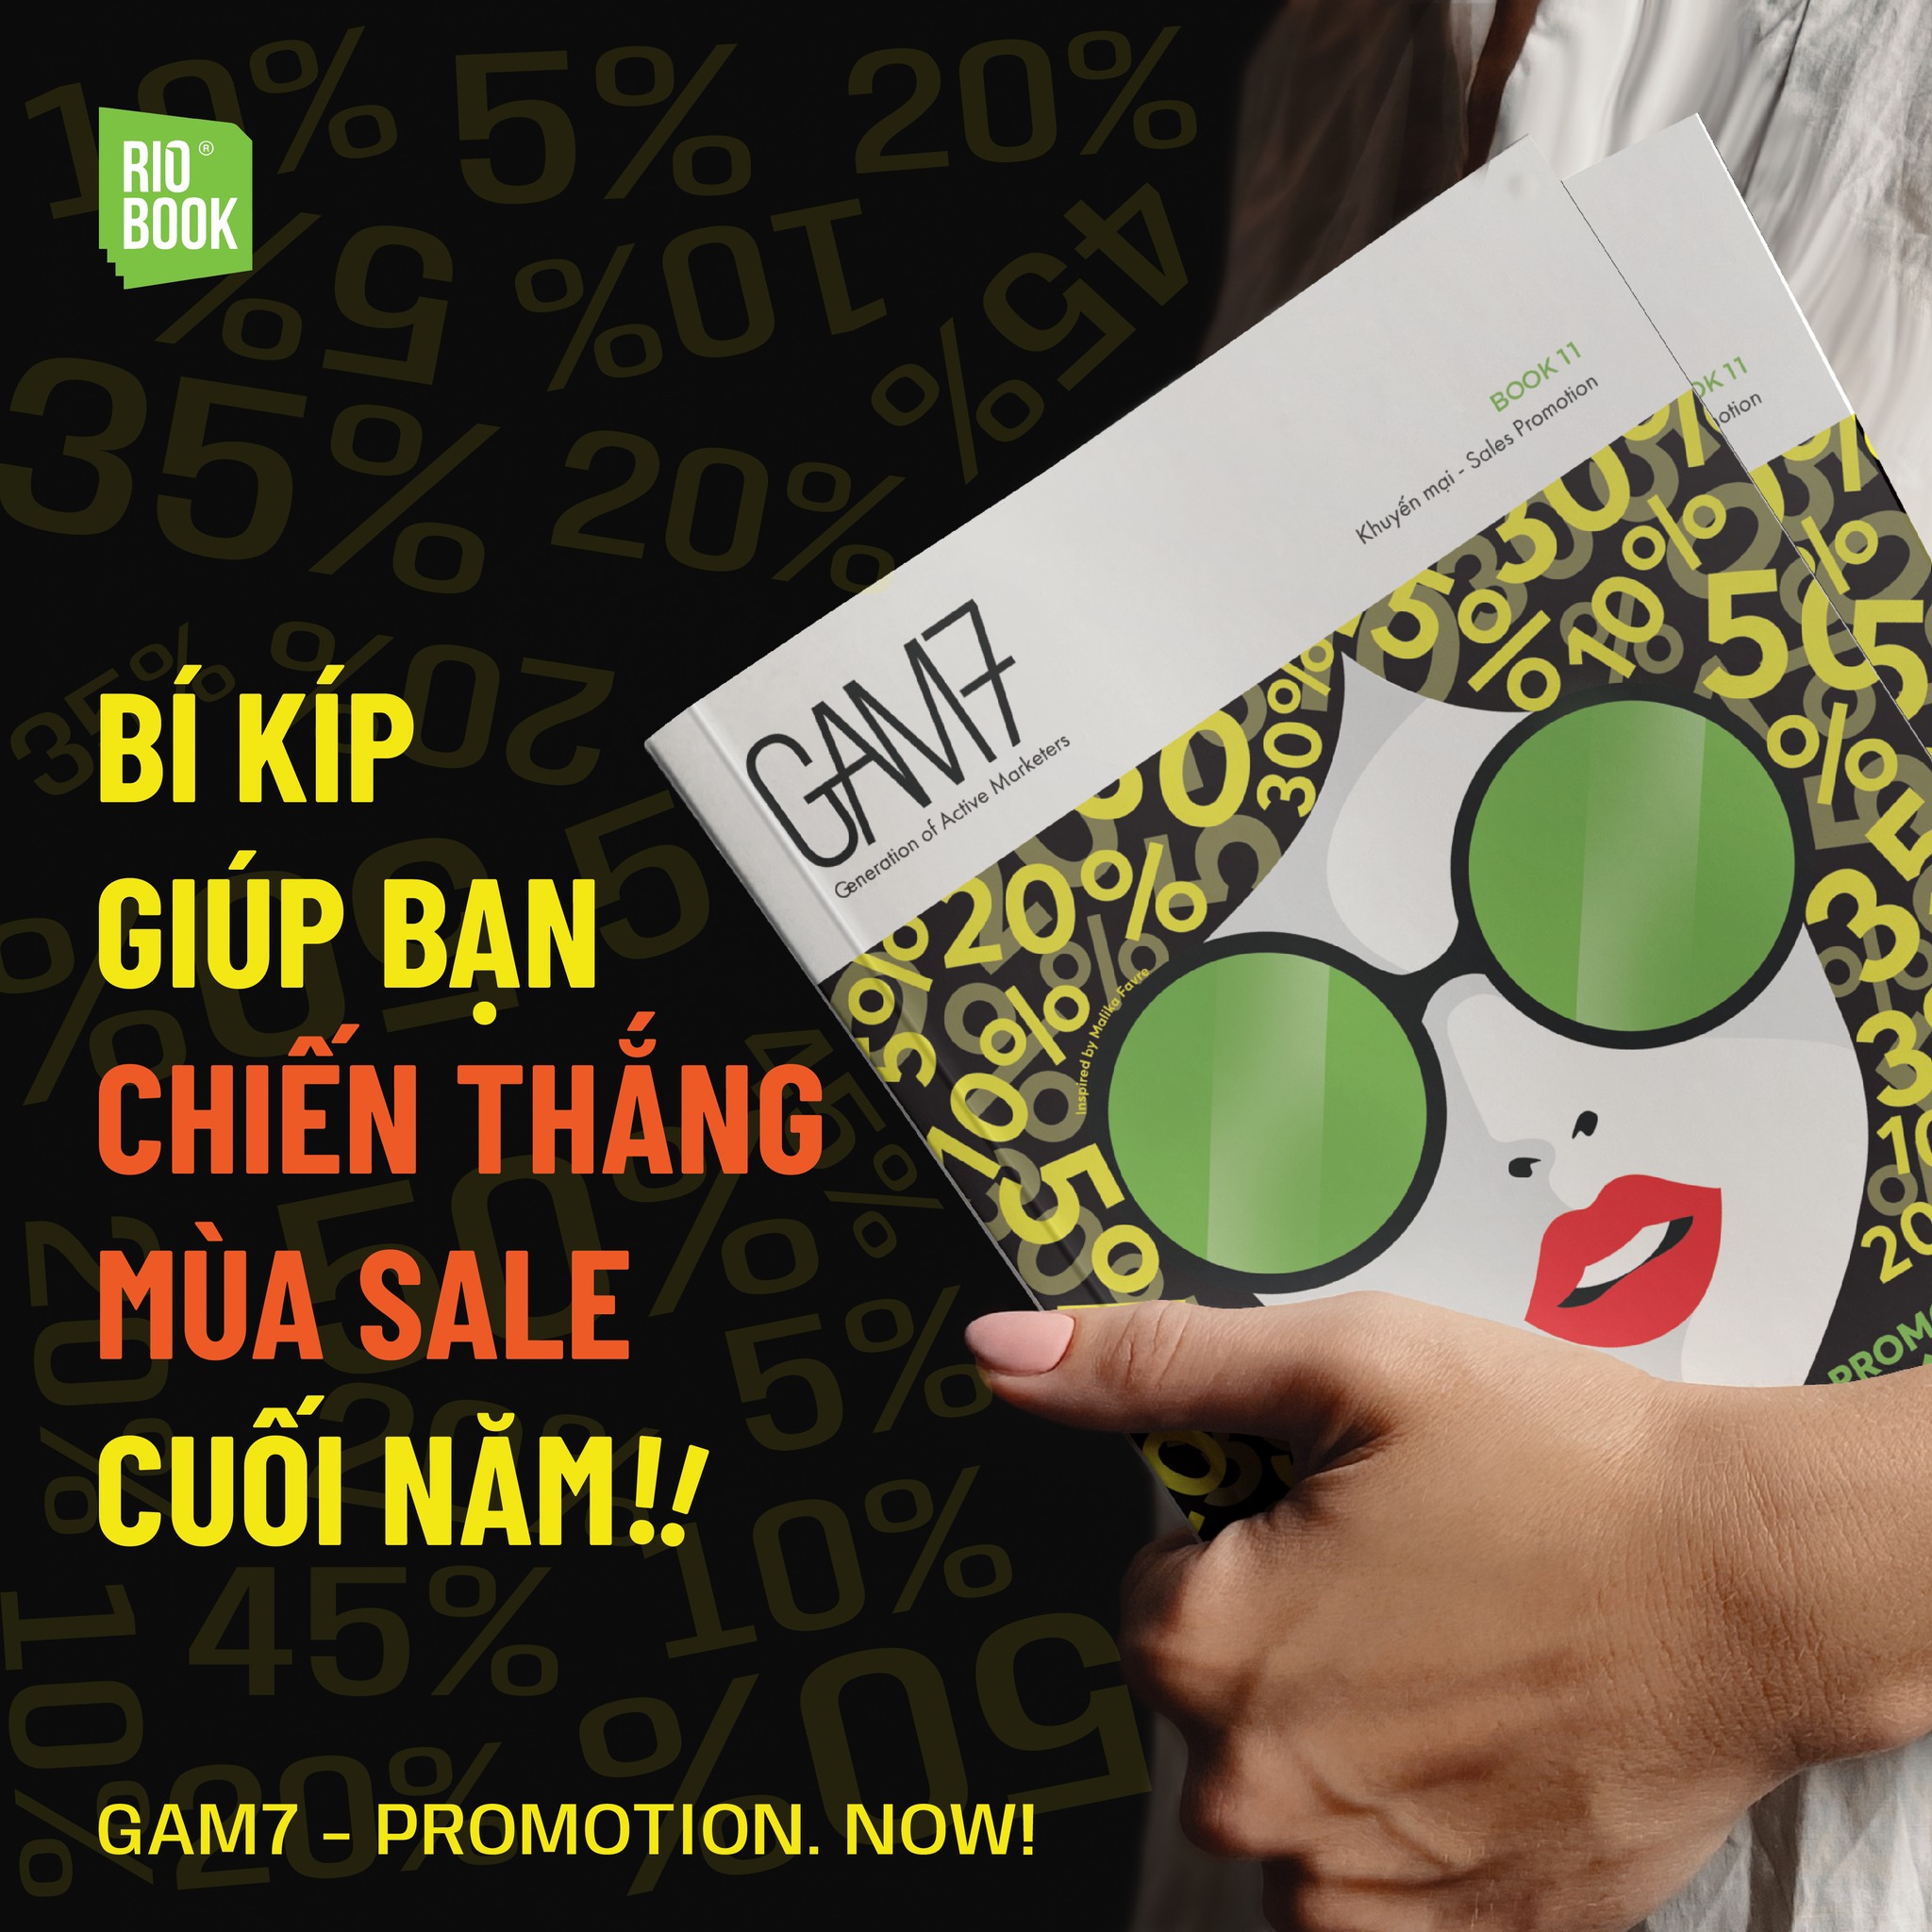 GAM7 BOOK NO.11 PROMOTION NOW! - Khuyến Mại